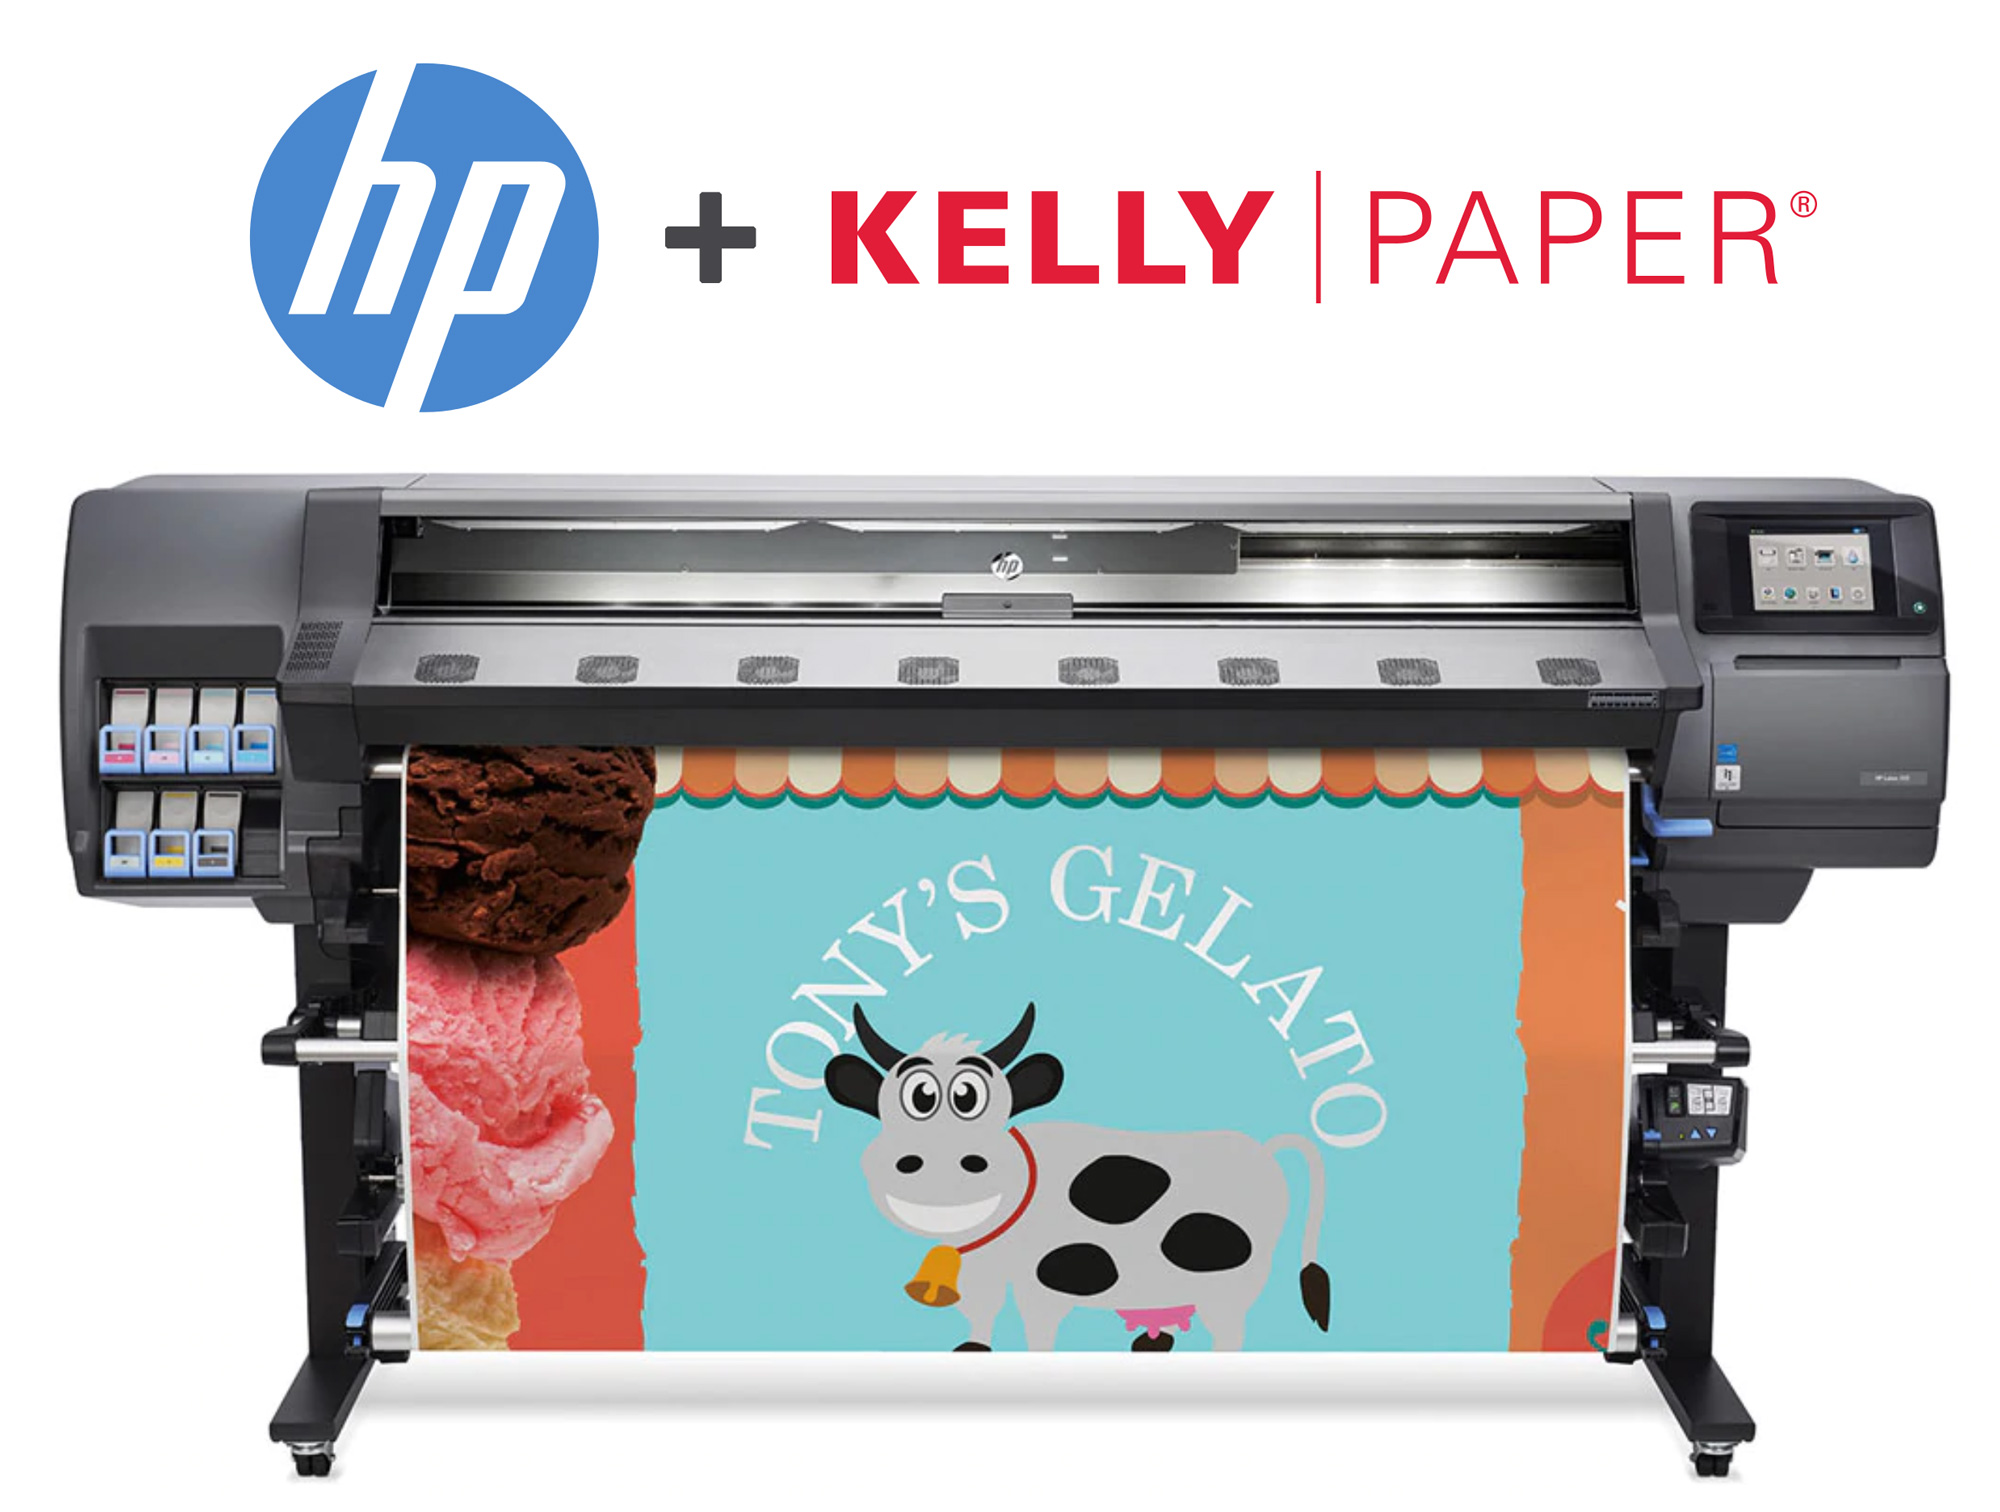 HP wide format printers showcasing their partnership with Kelly Paper in 2019